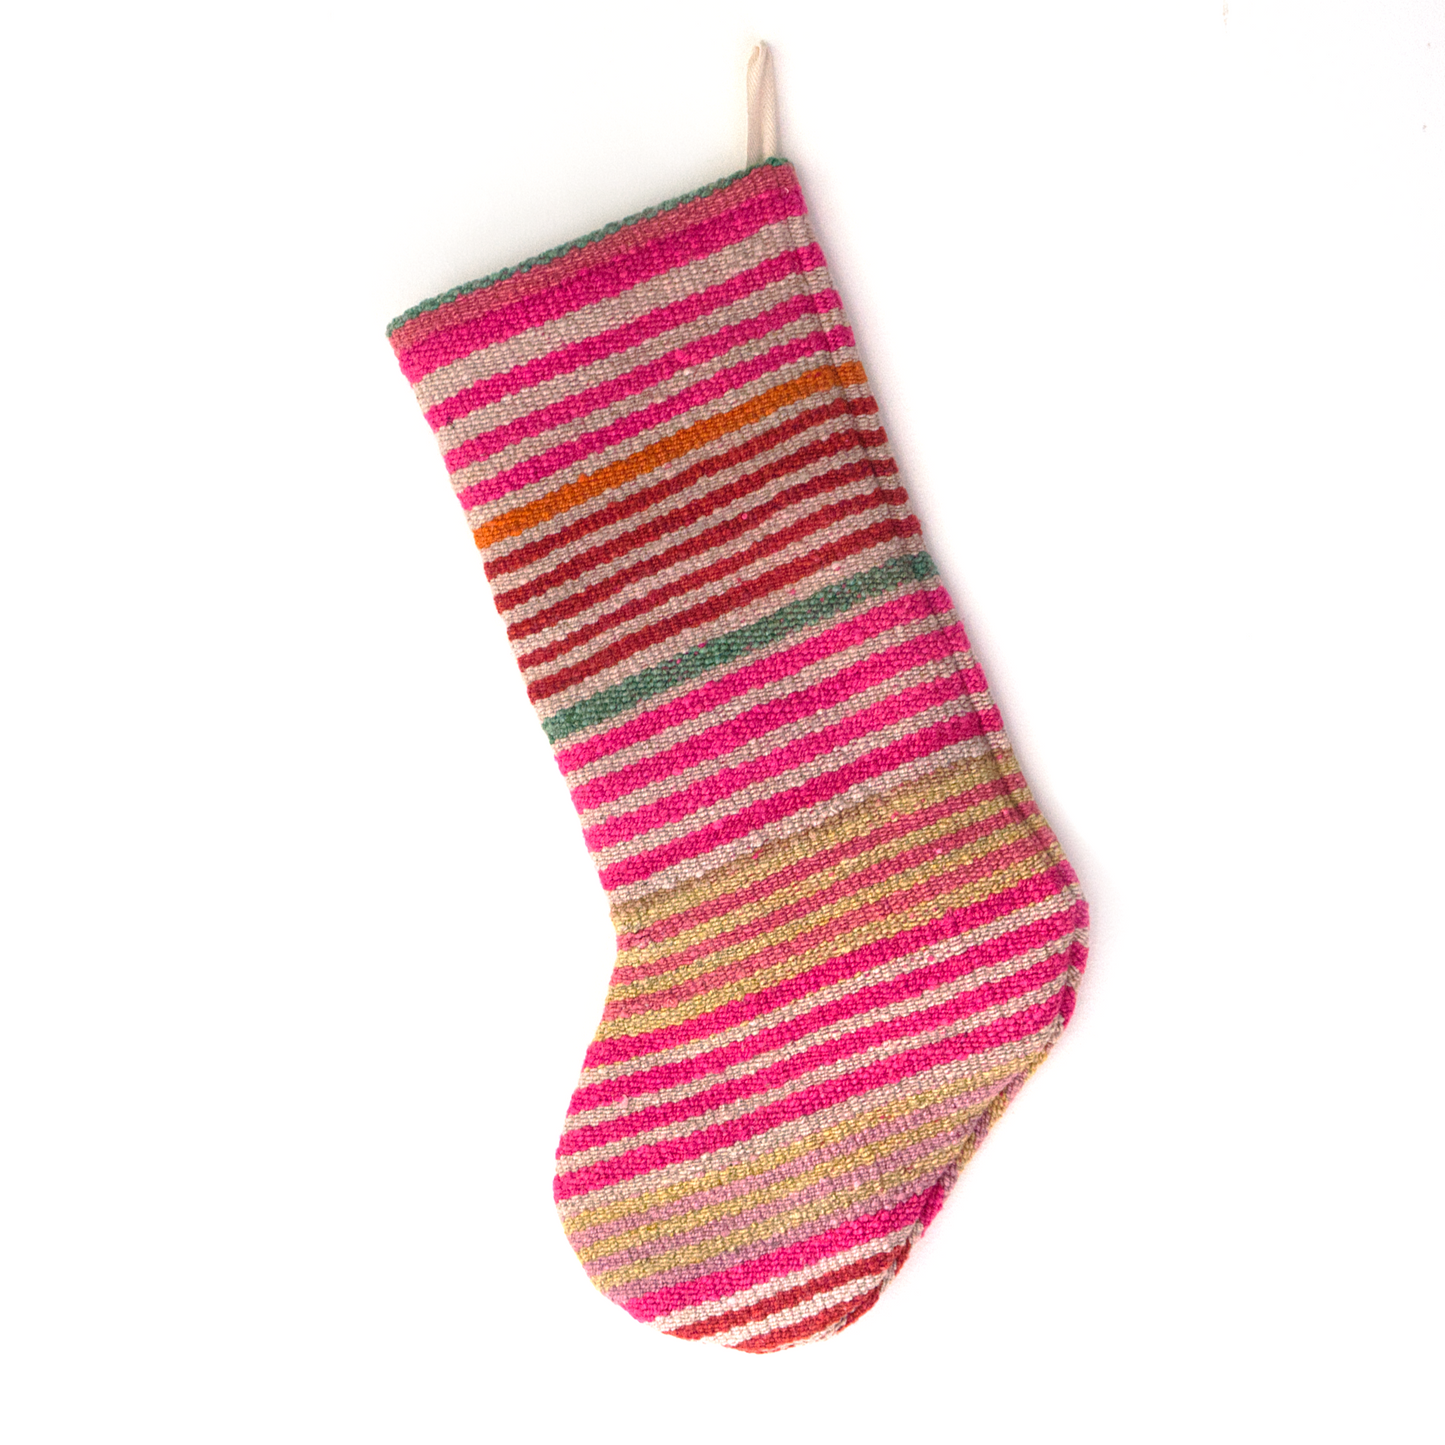 Intiearth_Peruvian_Frazada_Christmas_Stocking_multicolor_bright_and_colorful_one_of_a_kind